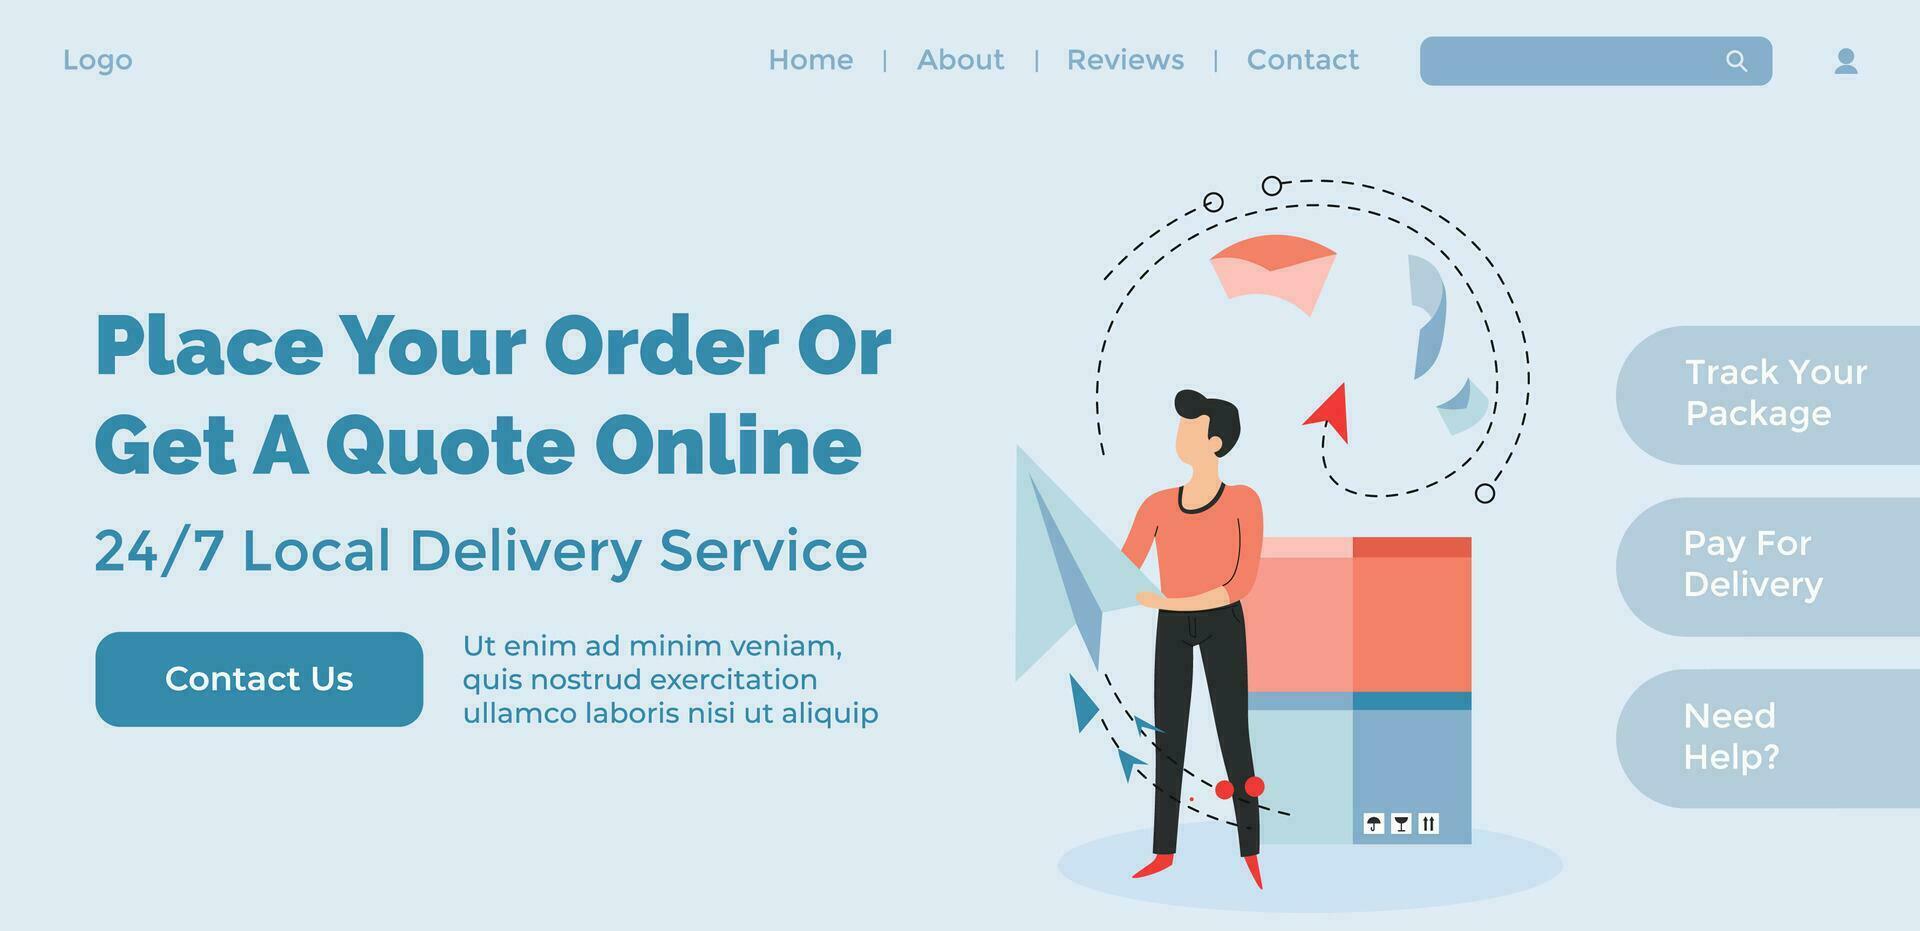 Place your order or get quote online, website vector